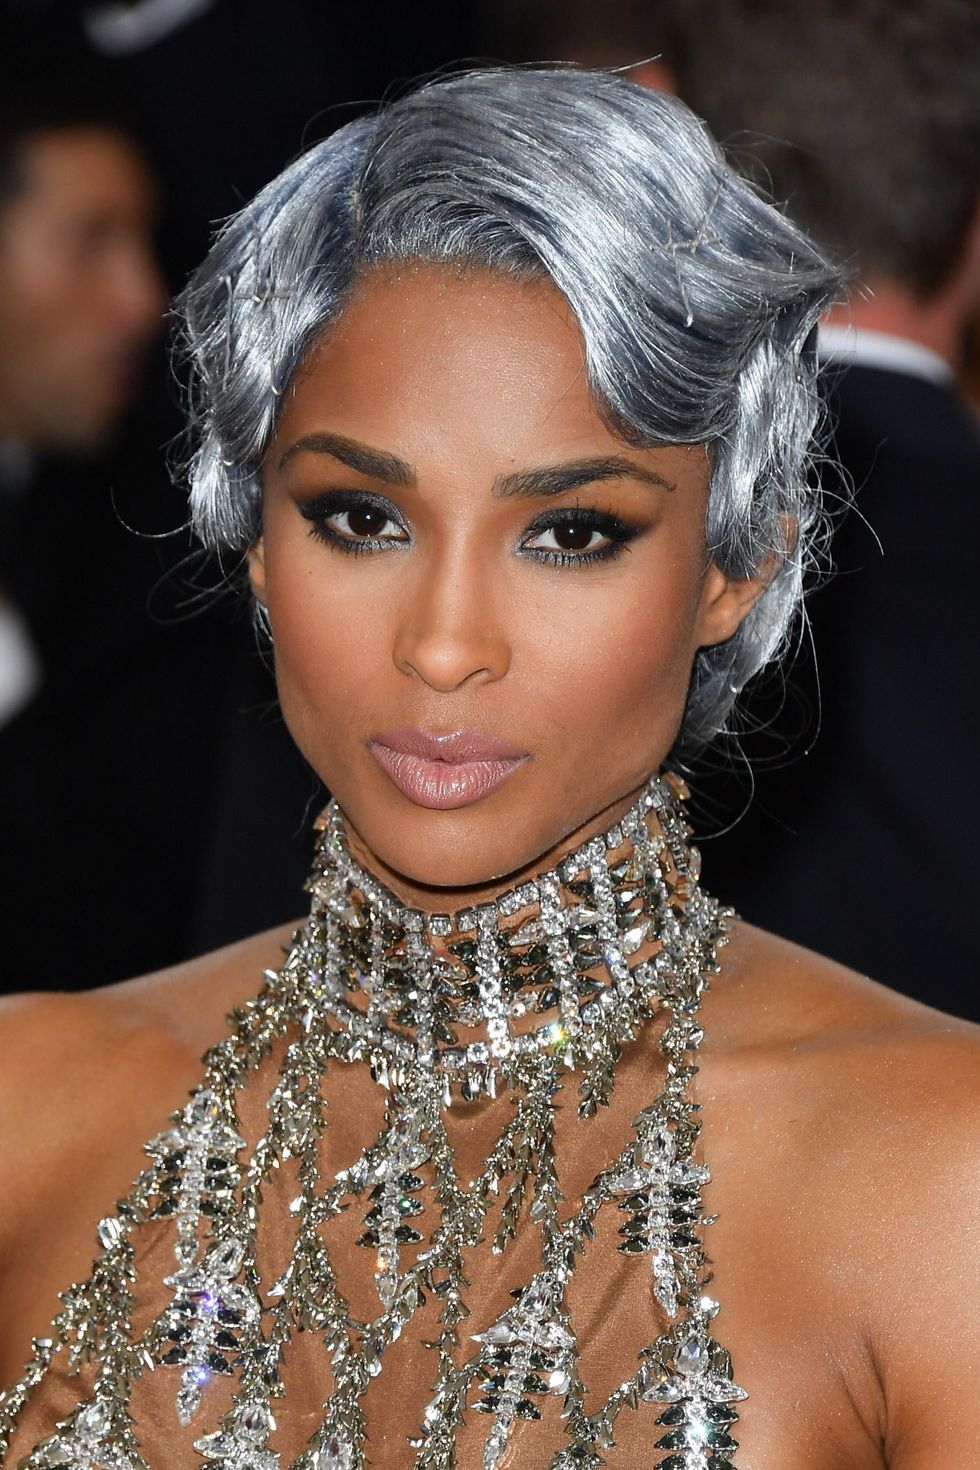 30 Best Gray Hair Color Ideas - Beautiful Gray and Silver Hairstyles